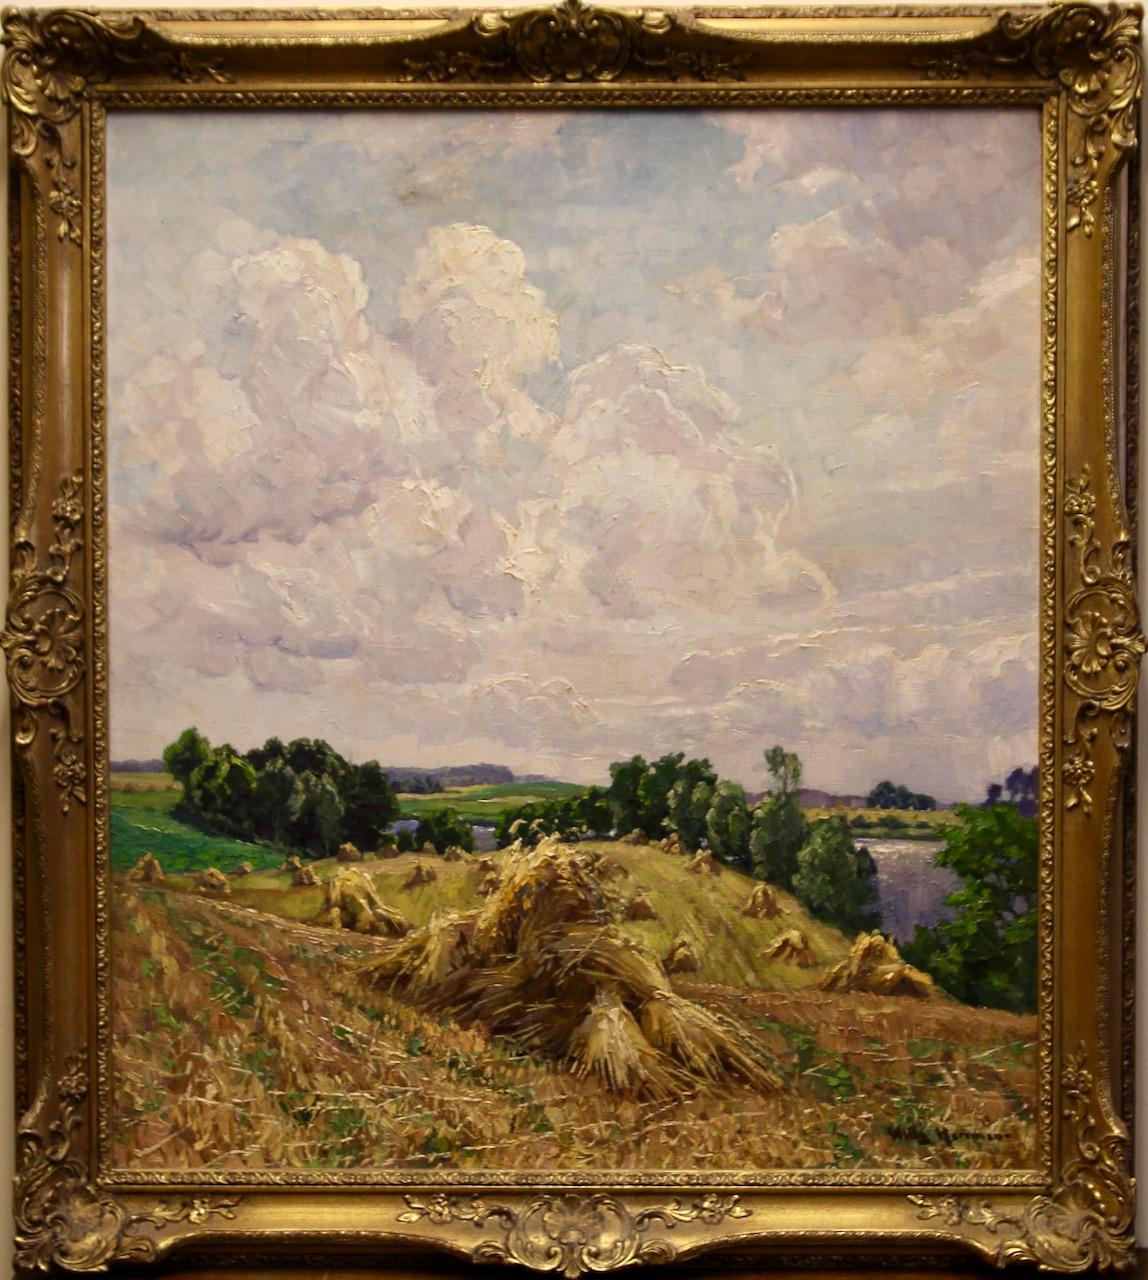 Willy Herrmann, sunny hay landscape. Oil on canvas.
Summer landscape with sheaves of corn.

Dimensions without frame 70.5 x 80.5 cm
Dimensions with frame 83.5 x 93.5 cm